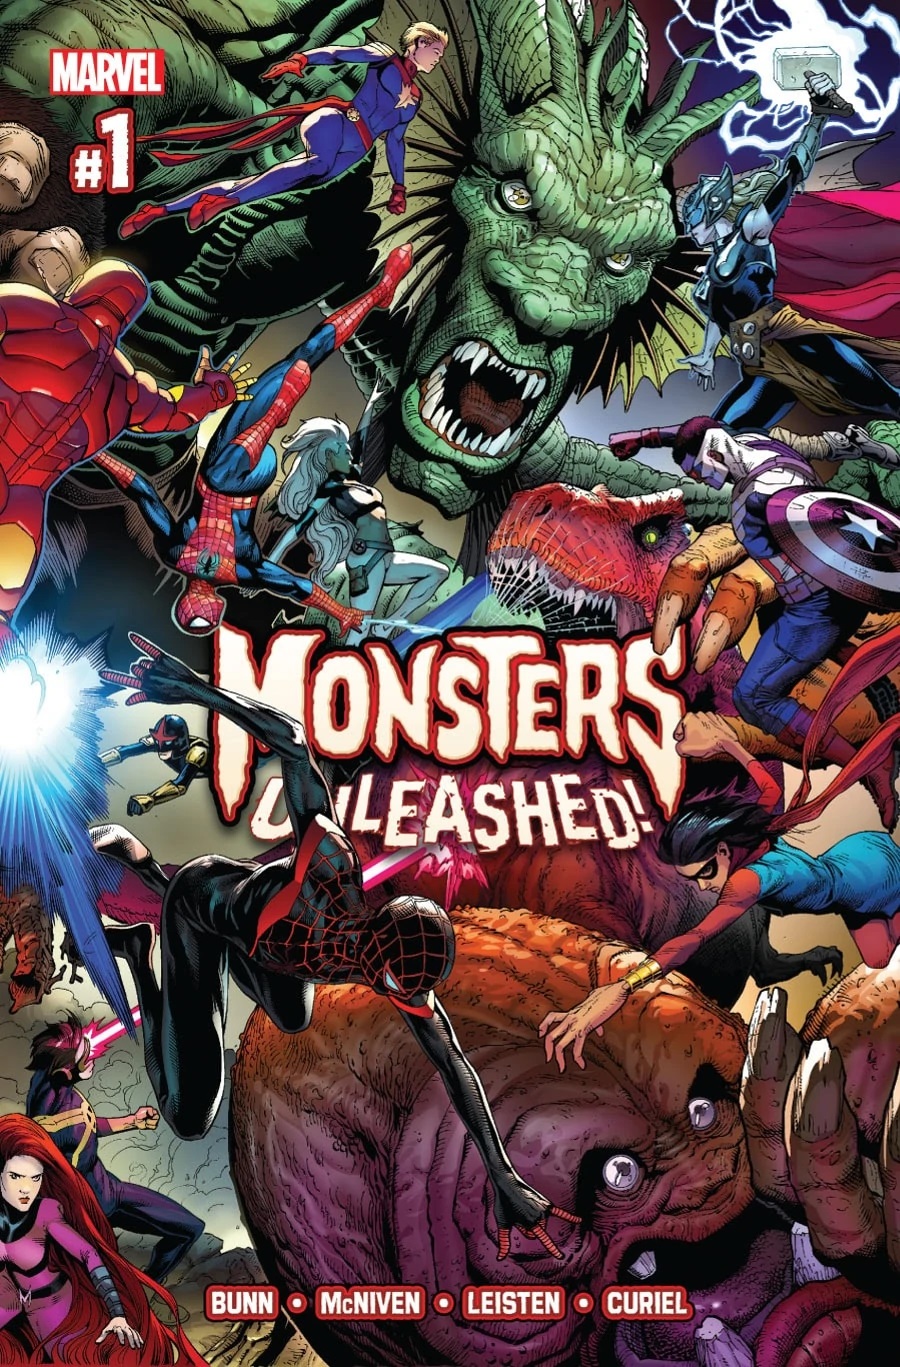 Monsters Unleashed! Limited Series Bundle Issues 1-5